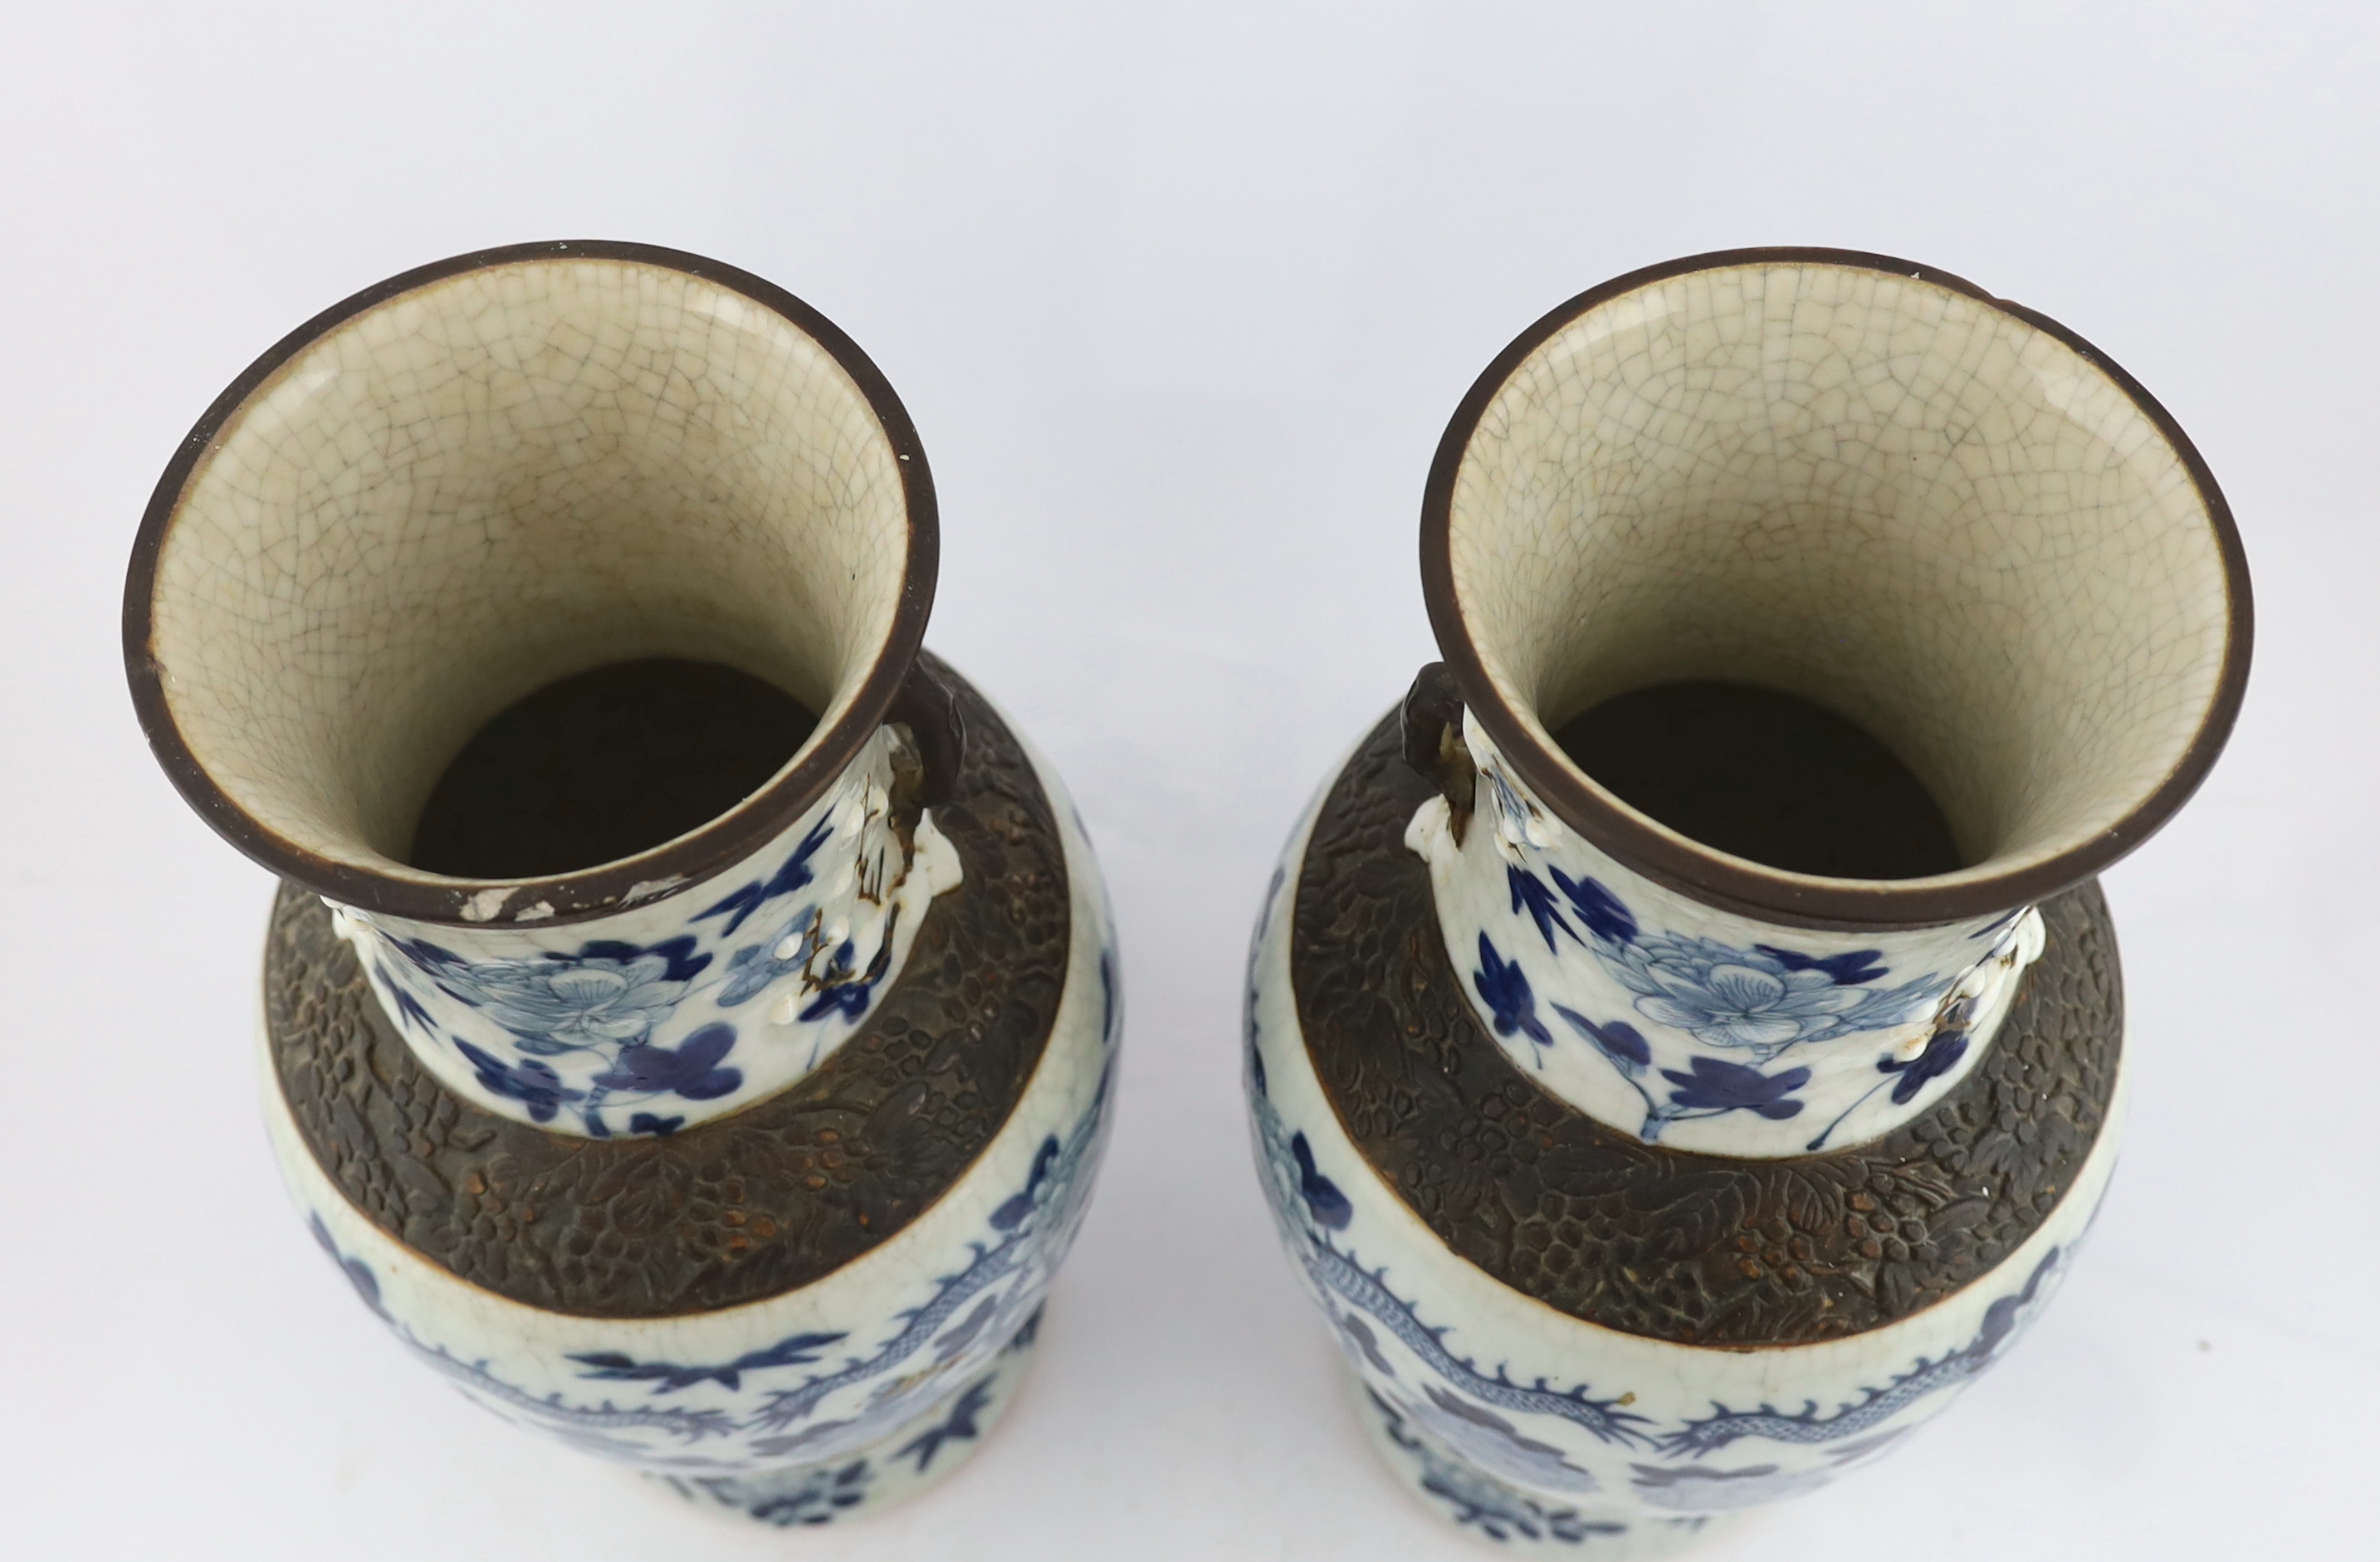 A pair of large Chinese blue and white crackle-glaze ‘dragon’ vases, early 20th century, each - Image 5 of 7